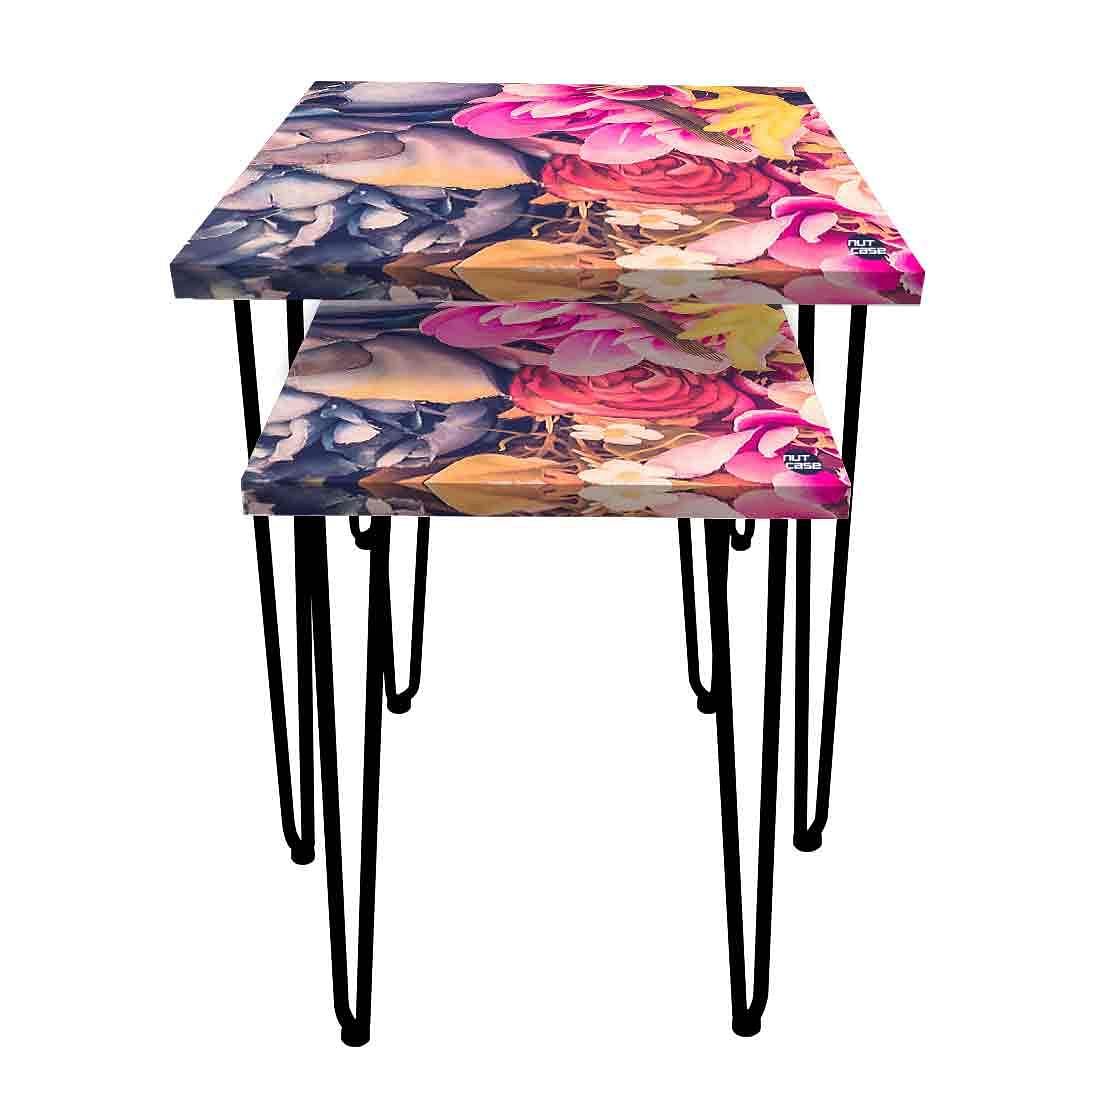 Nesting Side Table Set of 2 in a Floral Design Online in India Nutcase